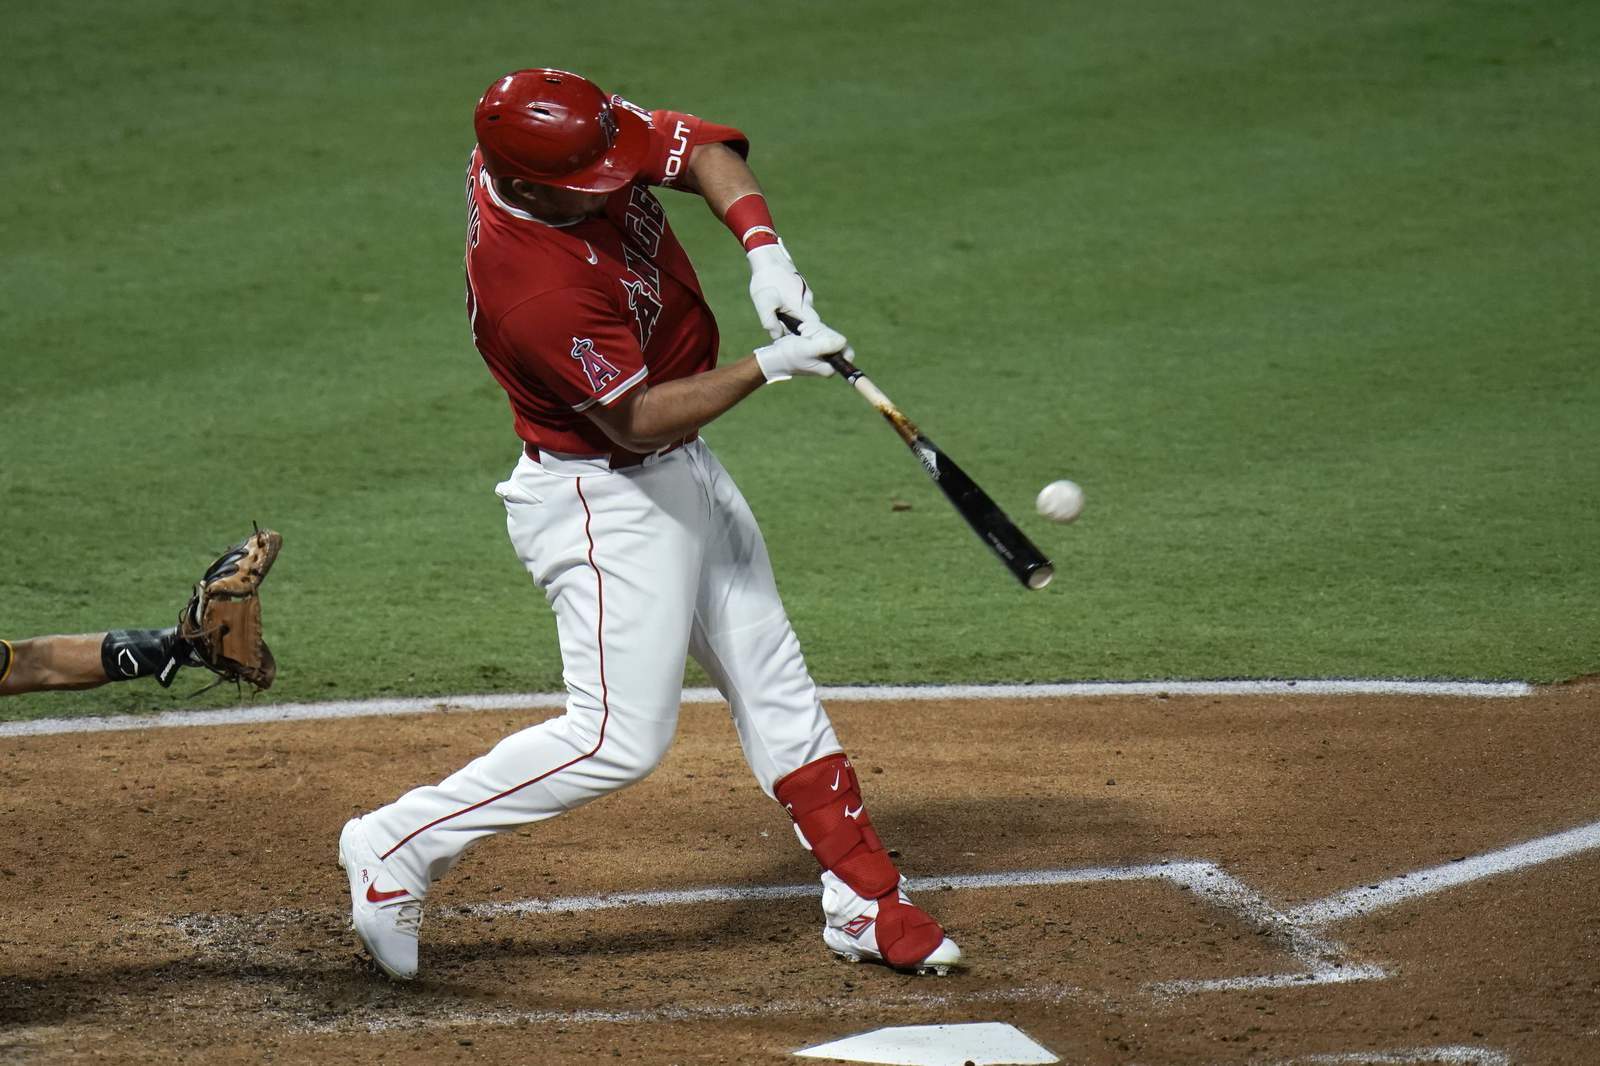 Trout ties Salmon's Angels career HR record with No. 299